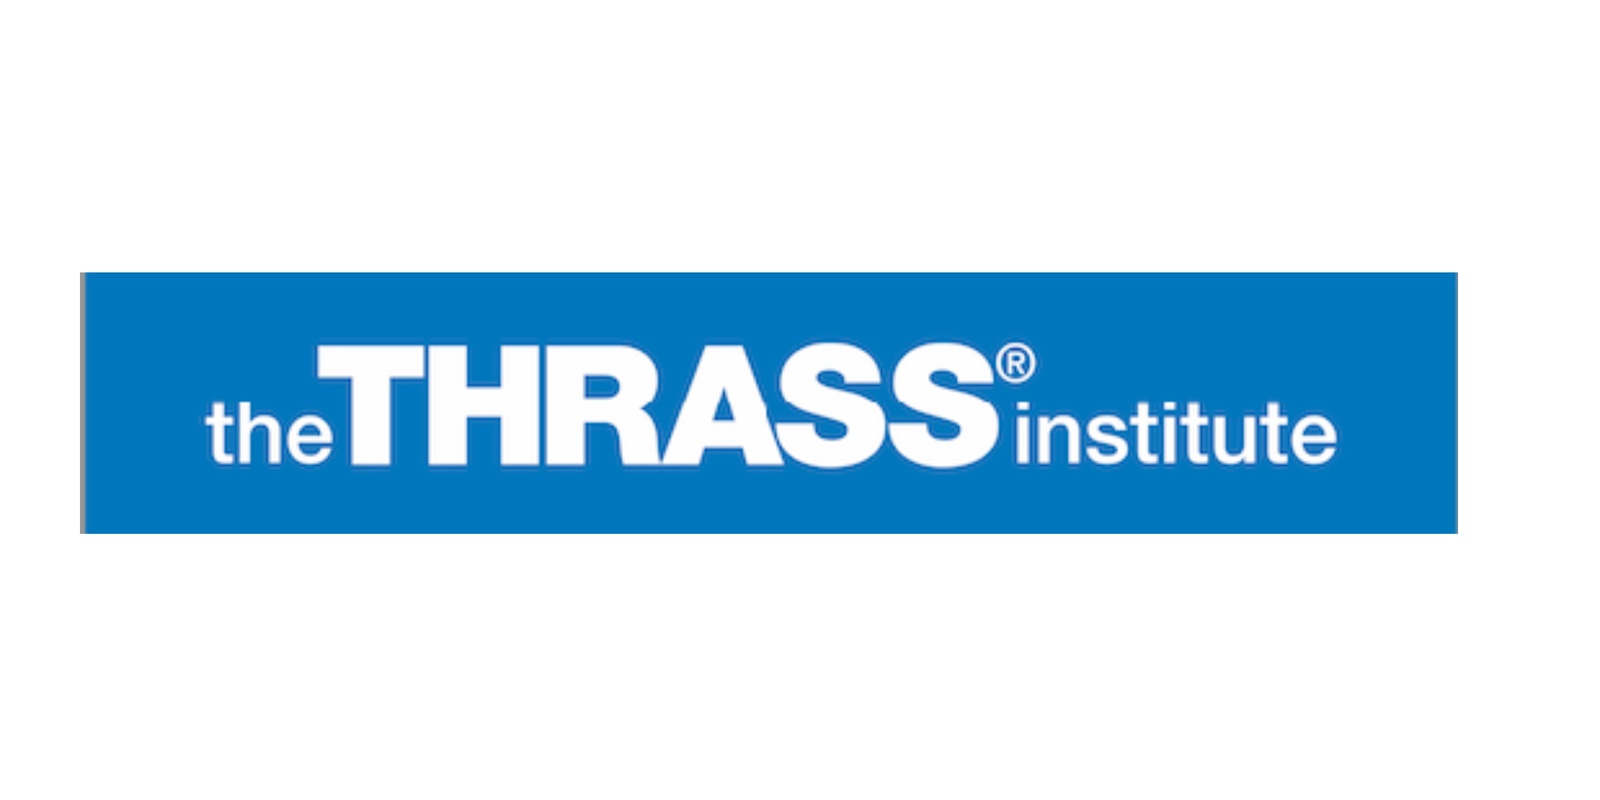 The THRASS Institute's banner